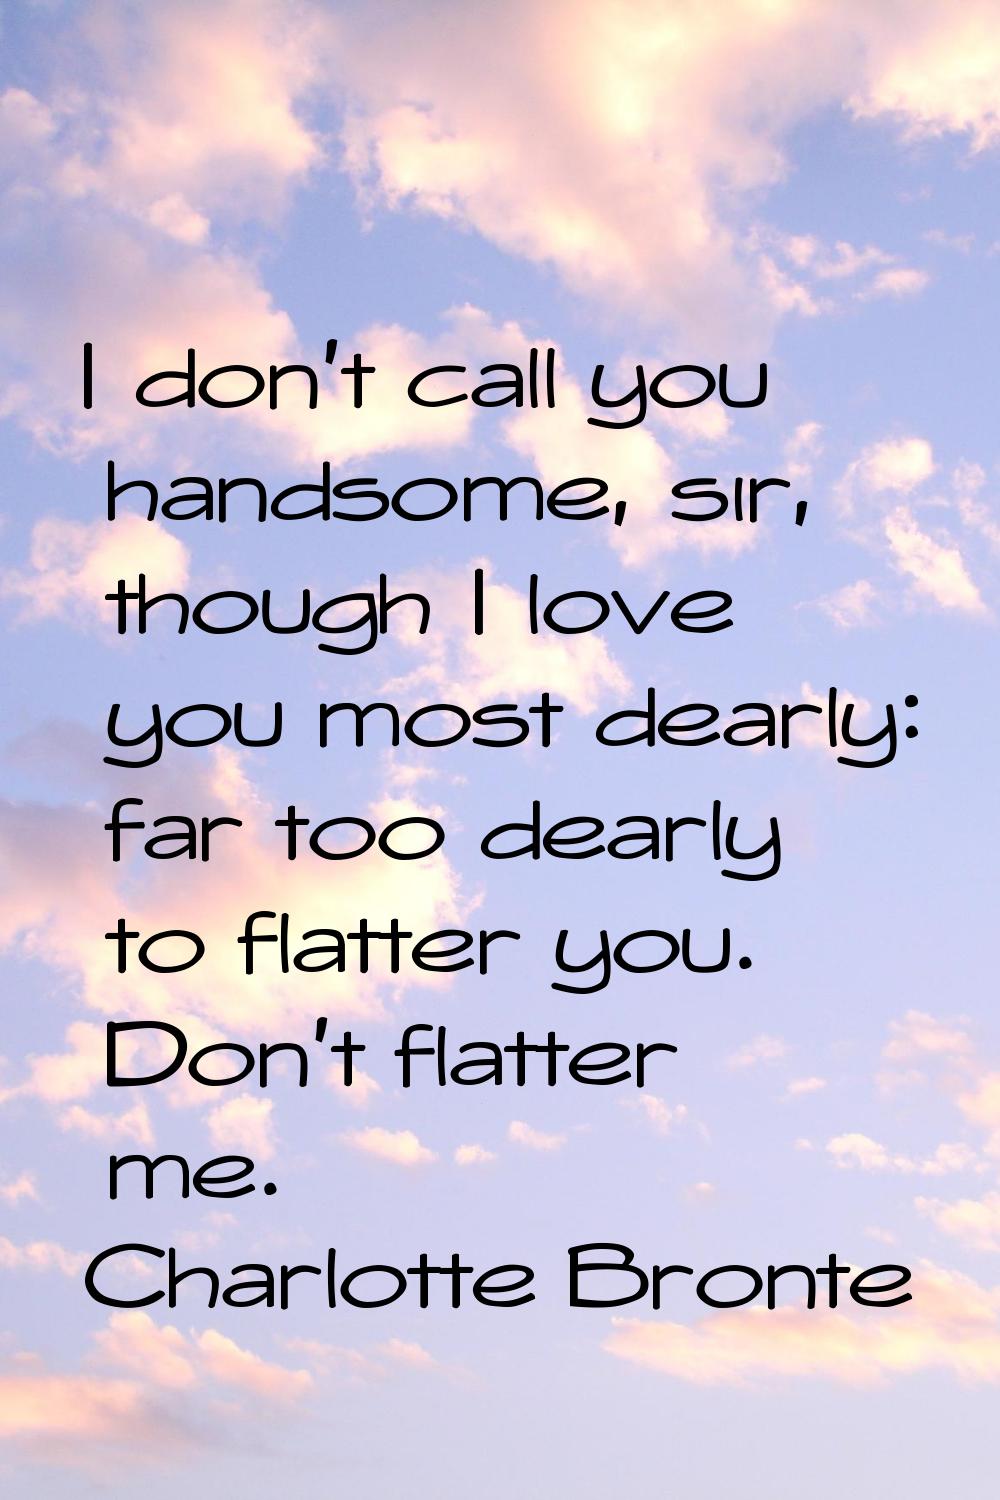 I don't call you handsome, sir, though I love you most dearly: far too dearly to flatter you. Don't